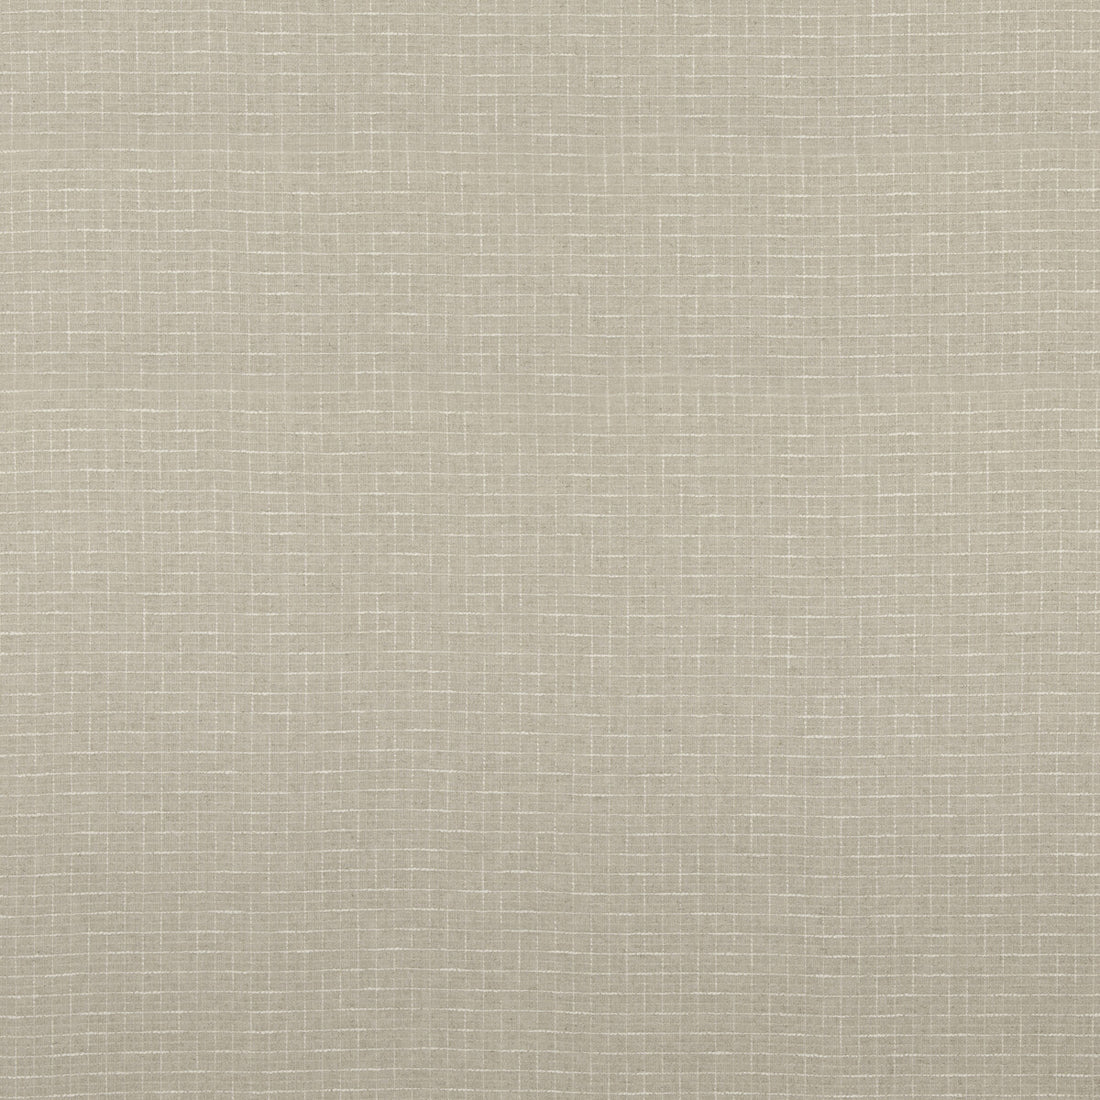 Nikita fabric in linen color - pattern ED85387.110.0 - by Threads in the Quintessential Naturals collection